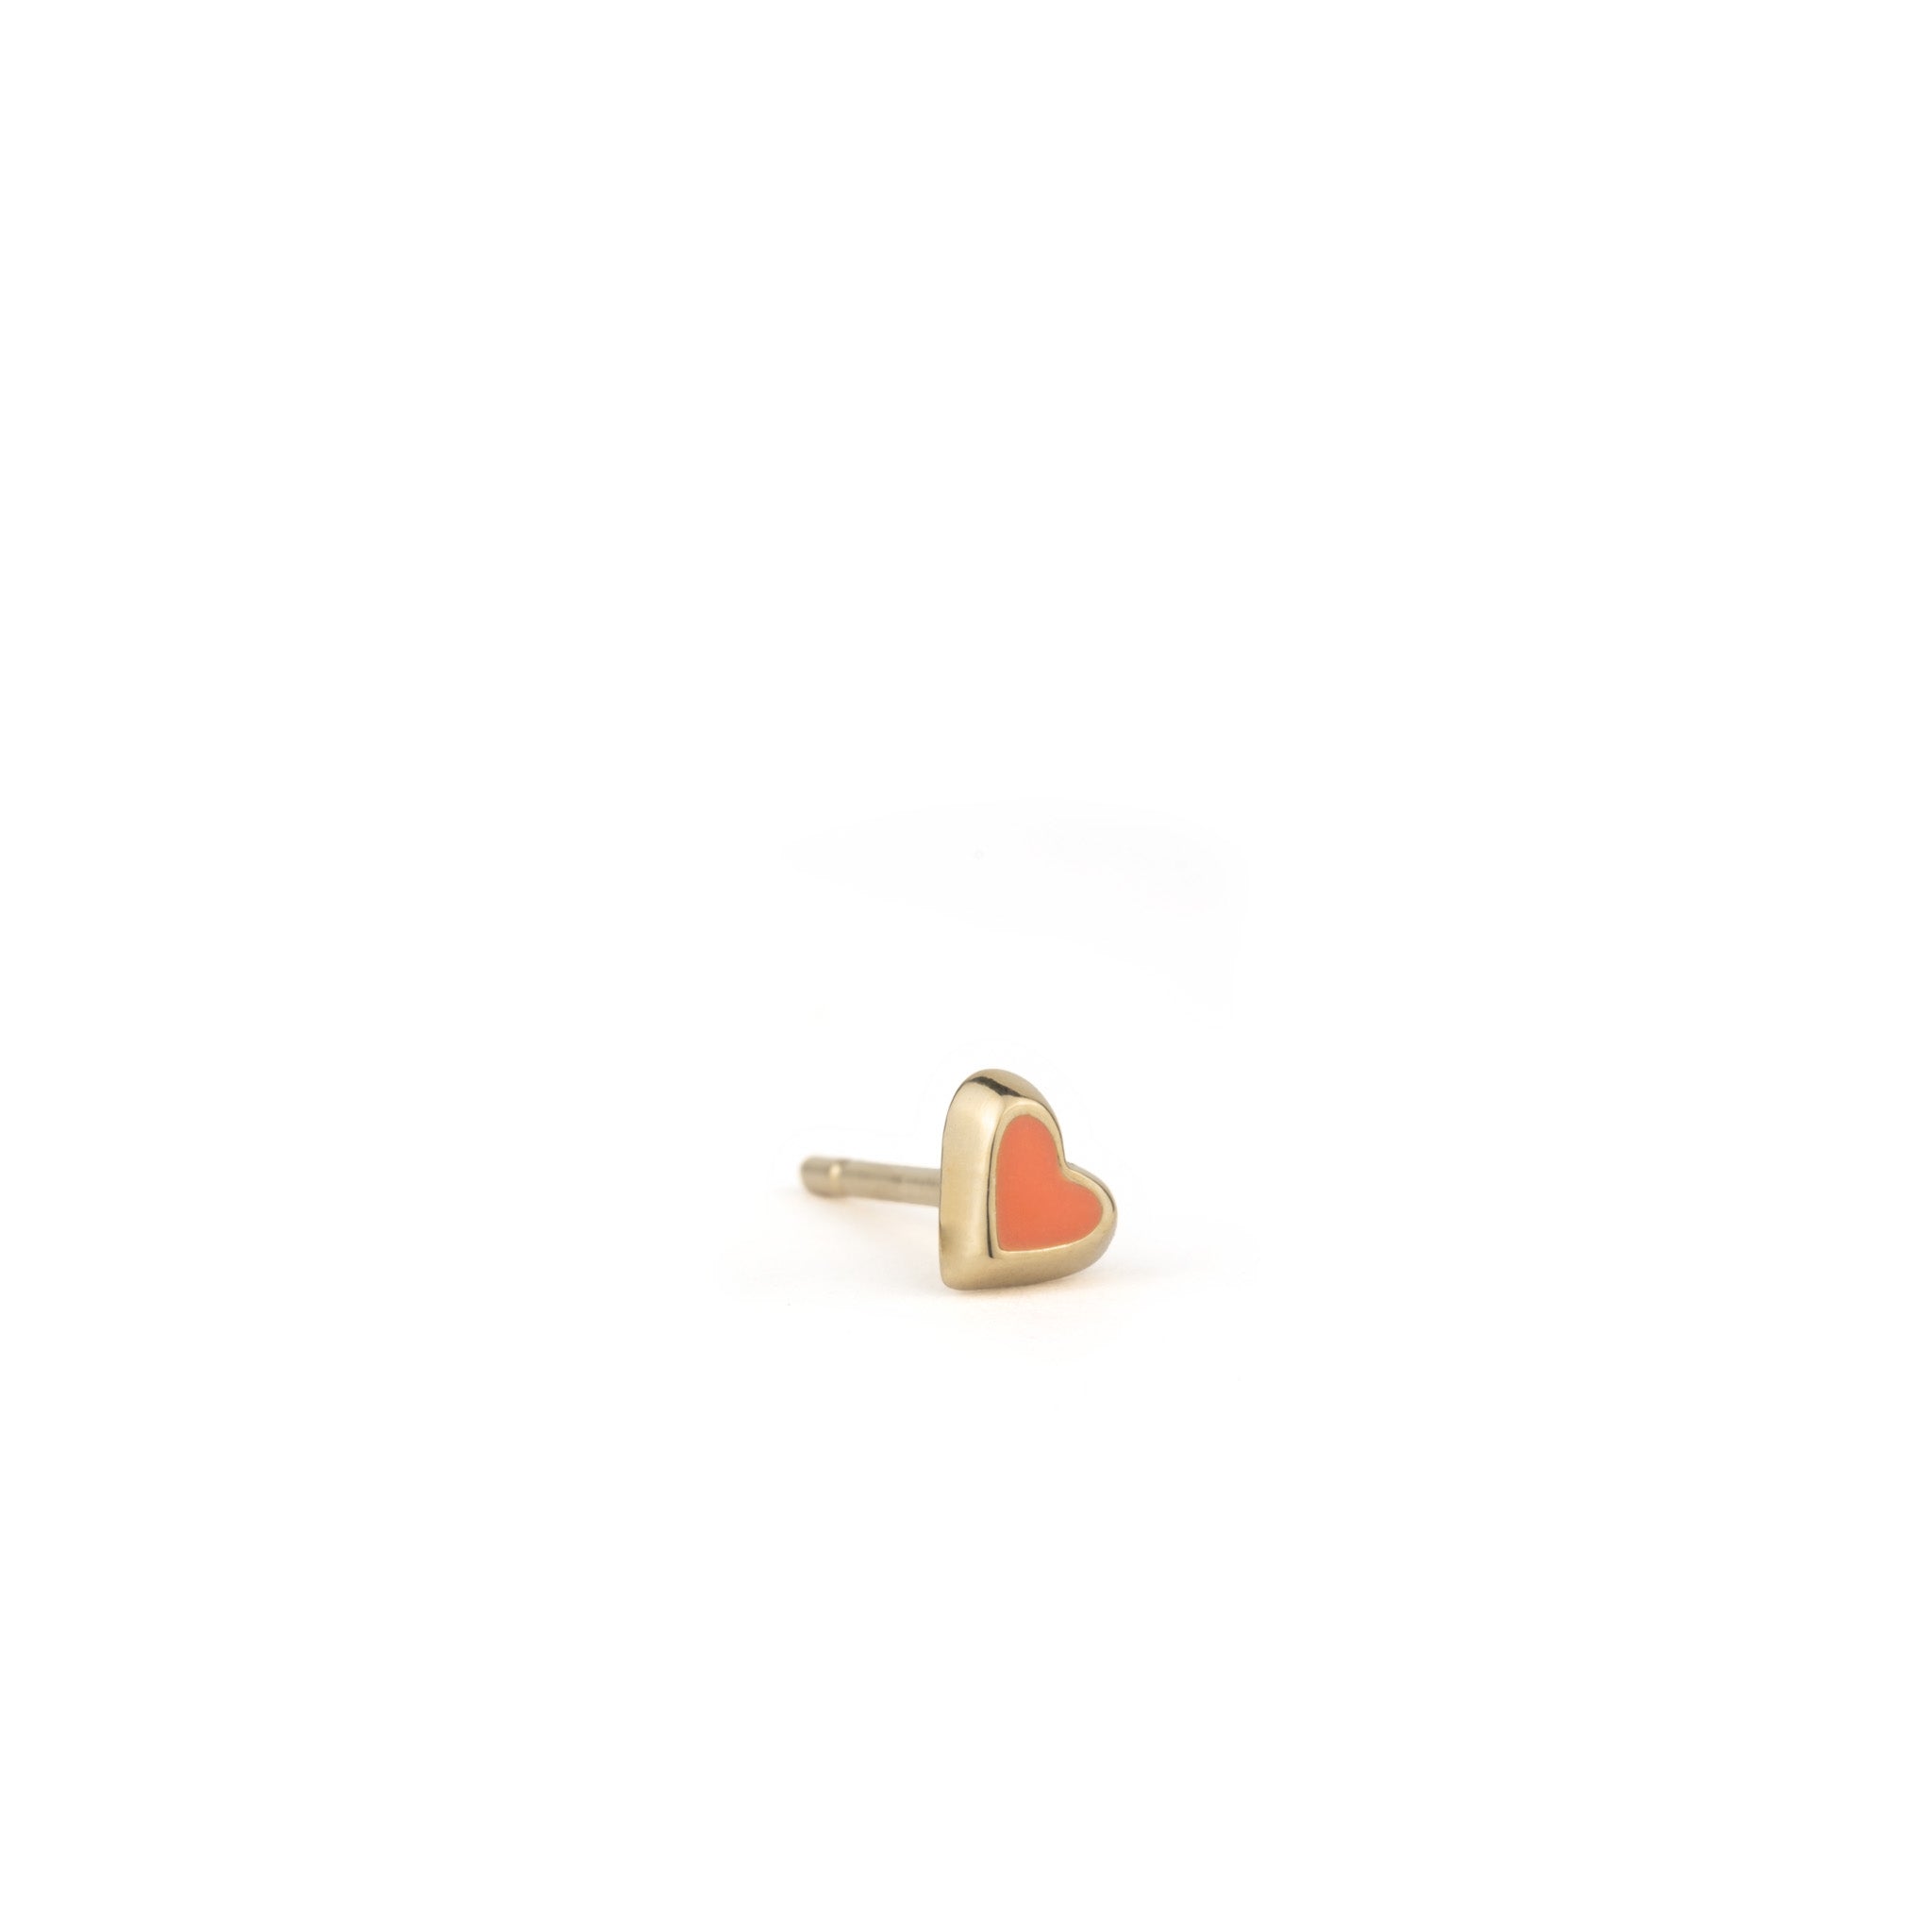 A small Aiden Jae Mini Heart Stud on a white background.